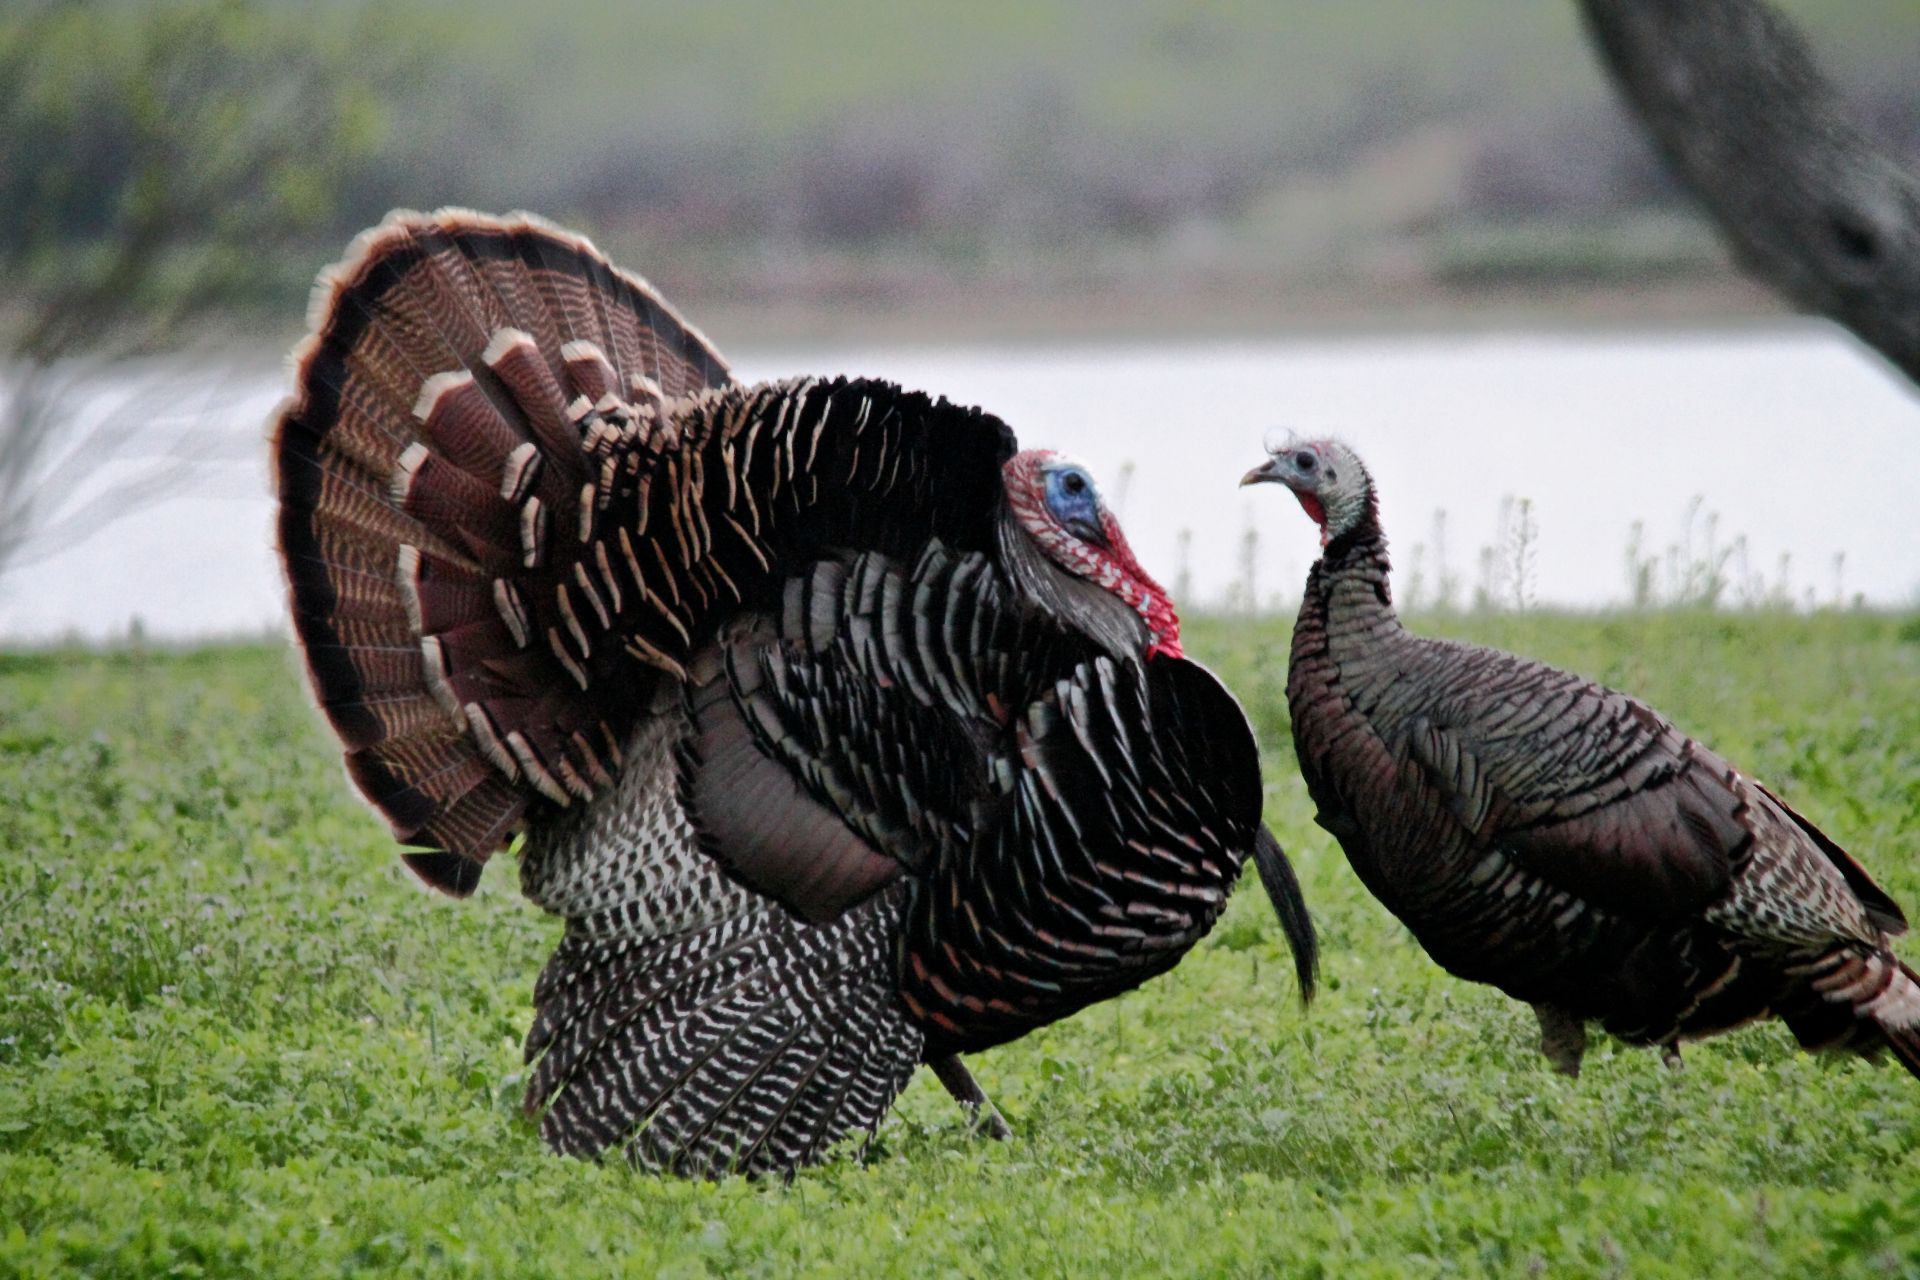 Two wild turkeys (fat brown ground birds) face each other, one with tail feathers spread.